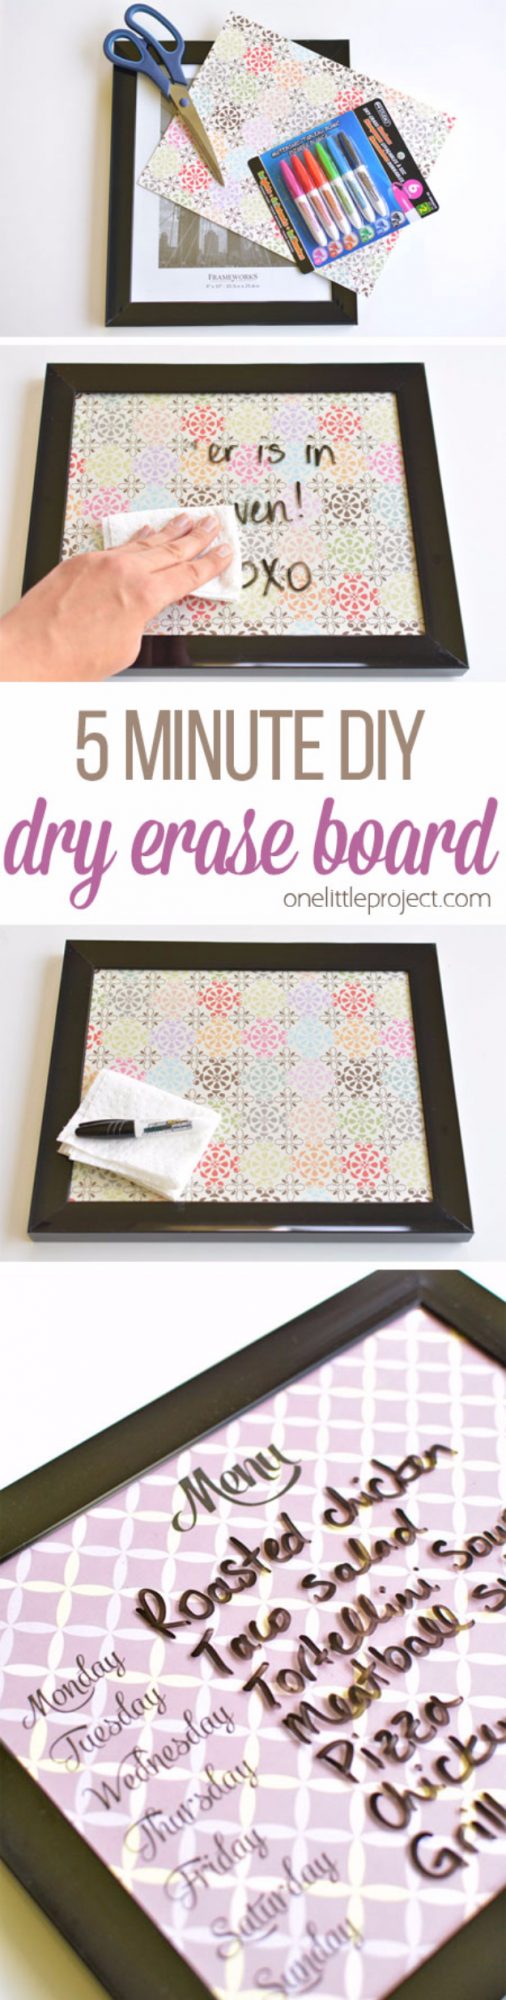 15 Incredibly Easy And Creative DIY Ideas For Your Home